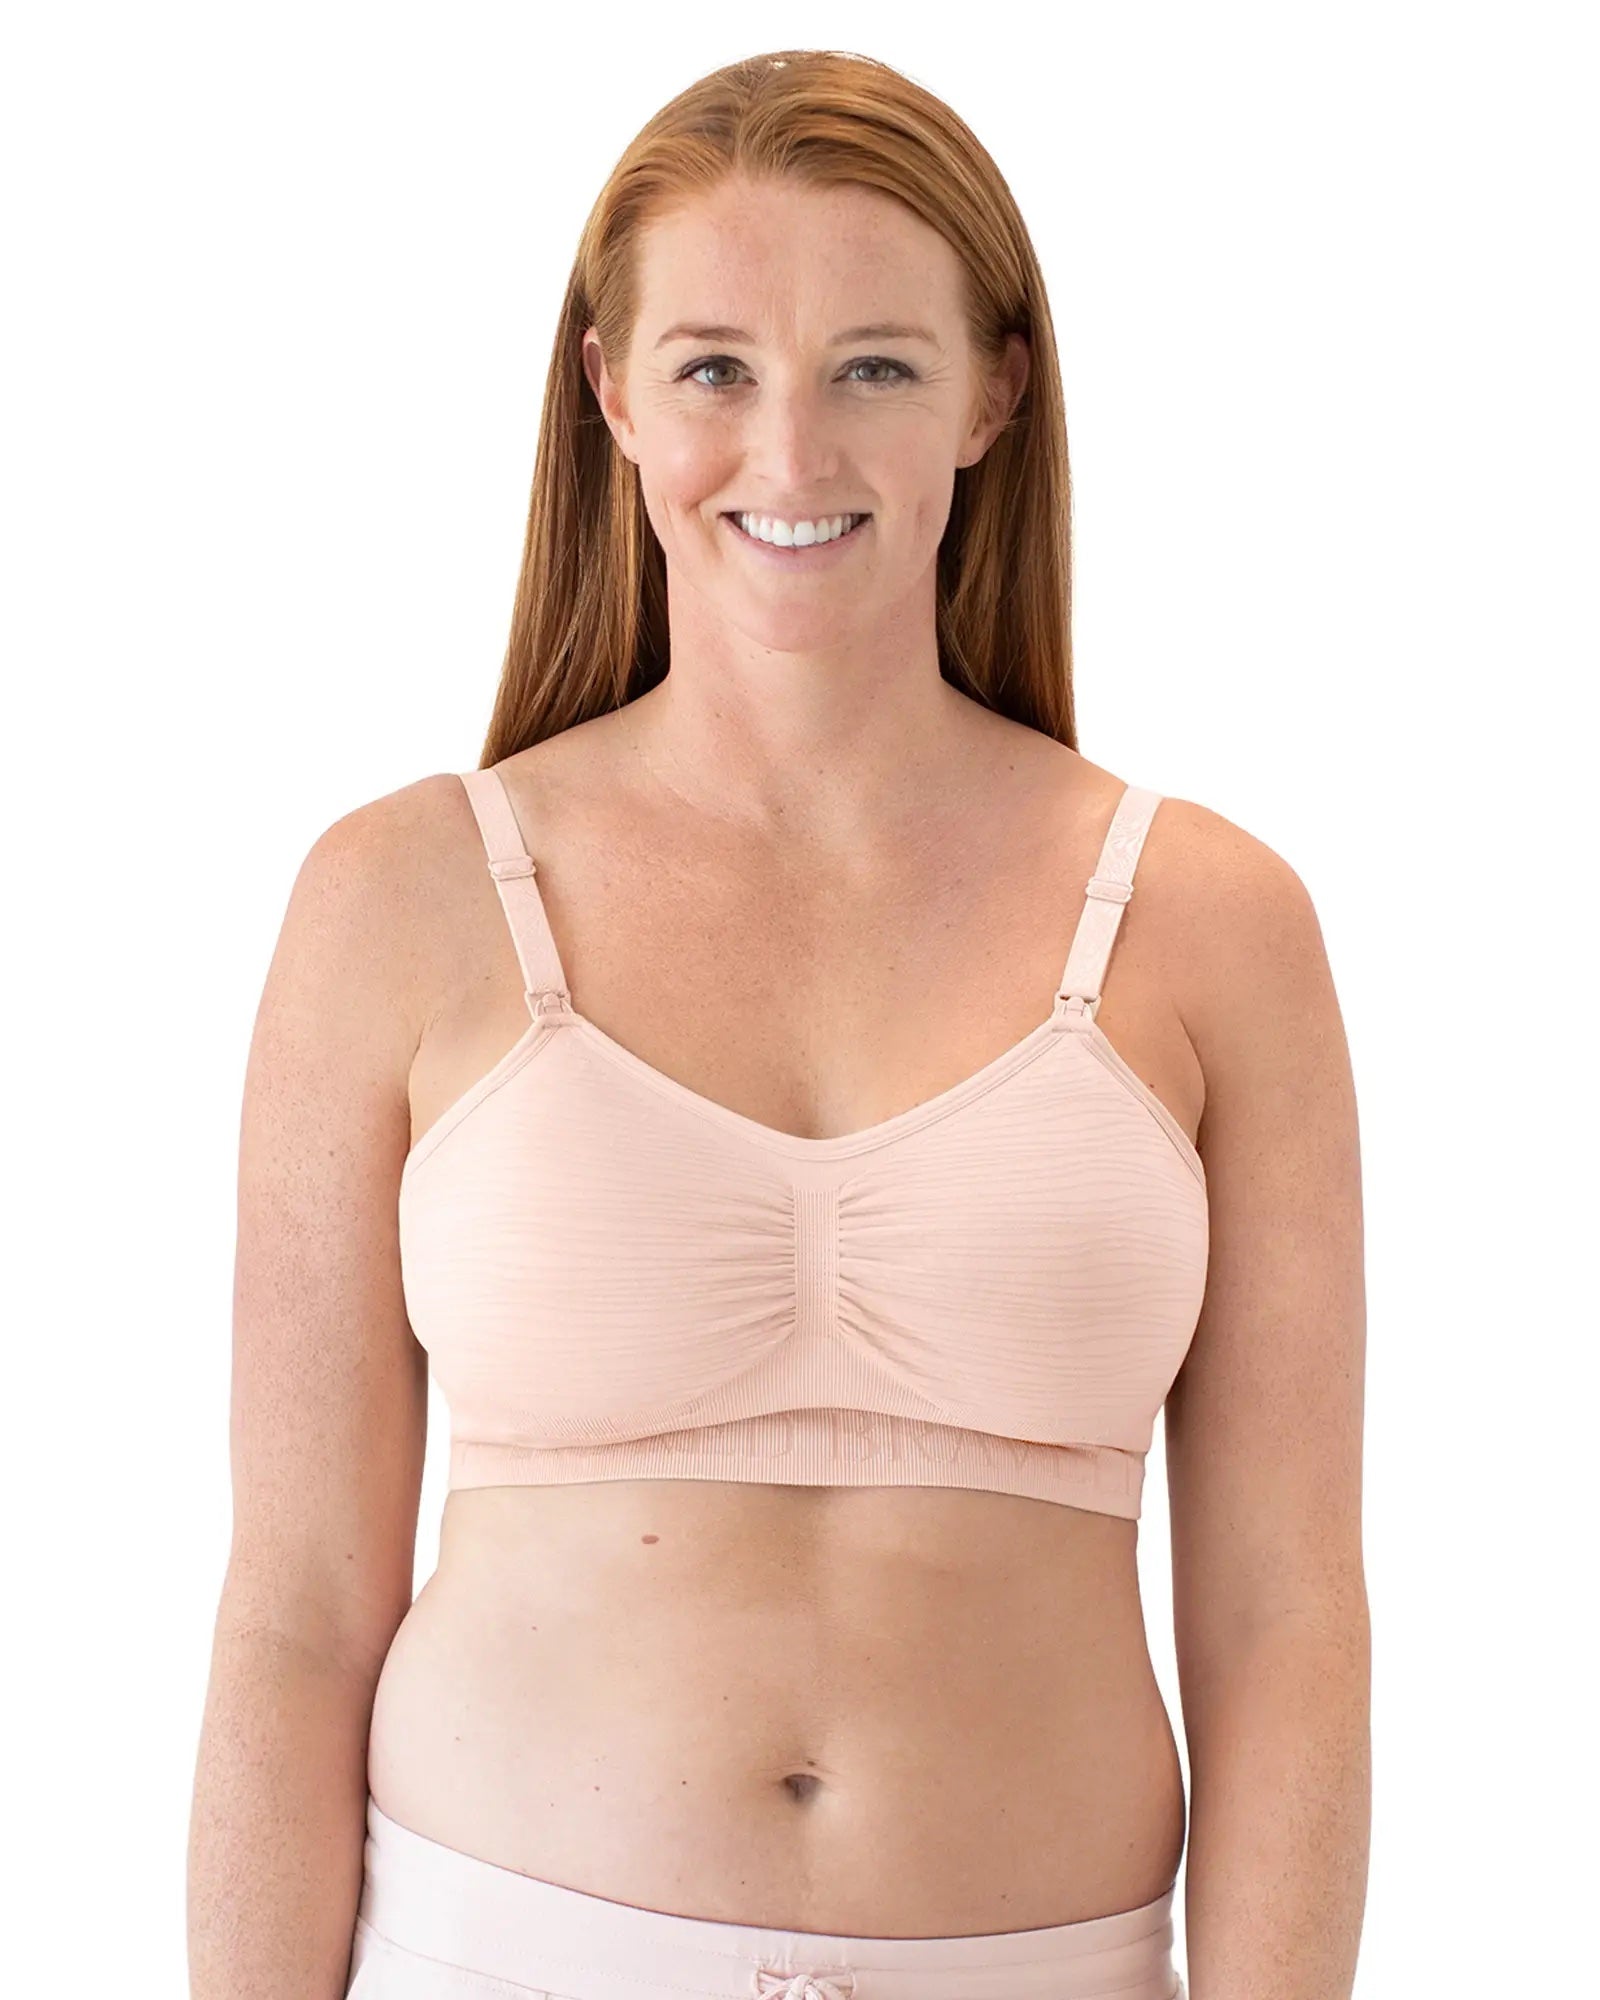 Kindred Bravely Women's Busty Sublime Hands-Free Pumping & Nursing Bra Plus  Sizes - Fits Sizes 42B-48H - Macy's